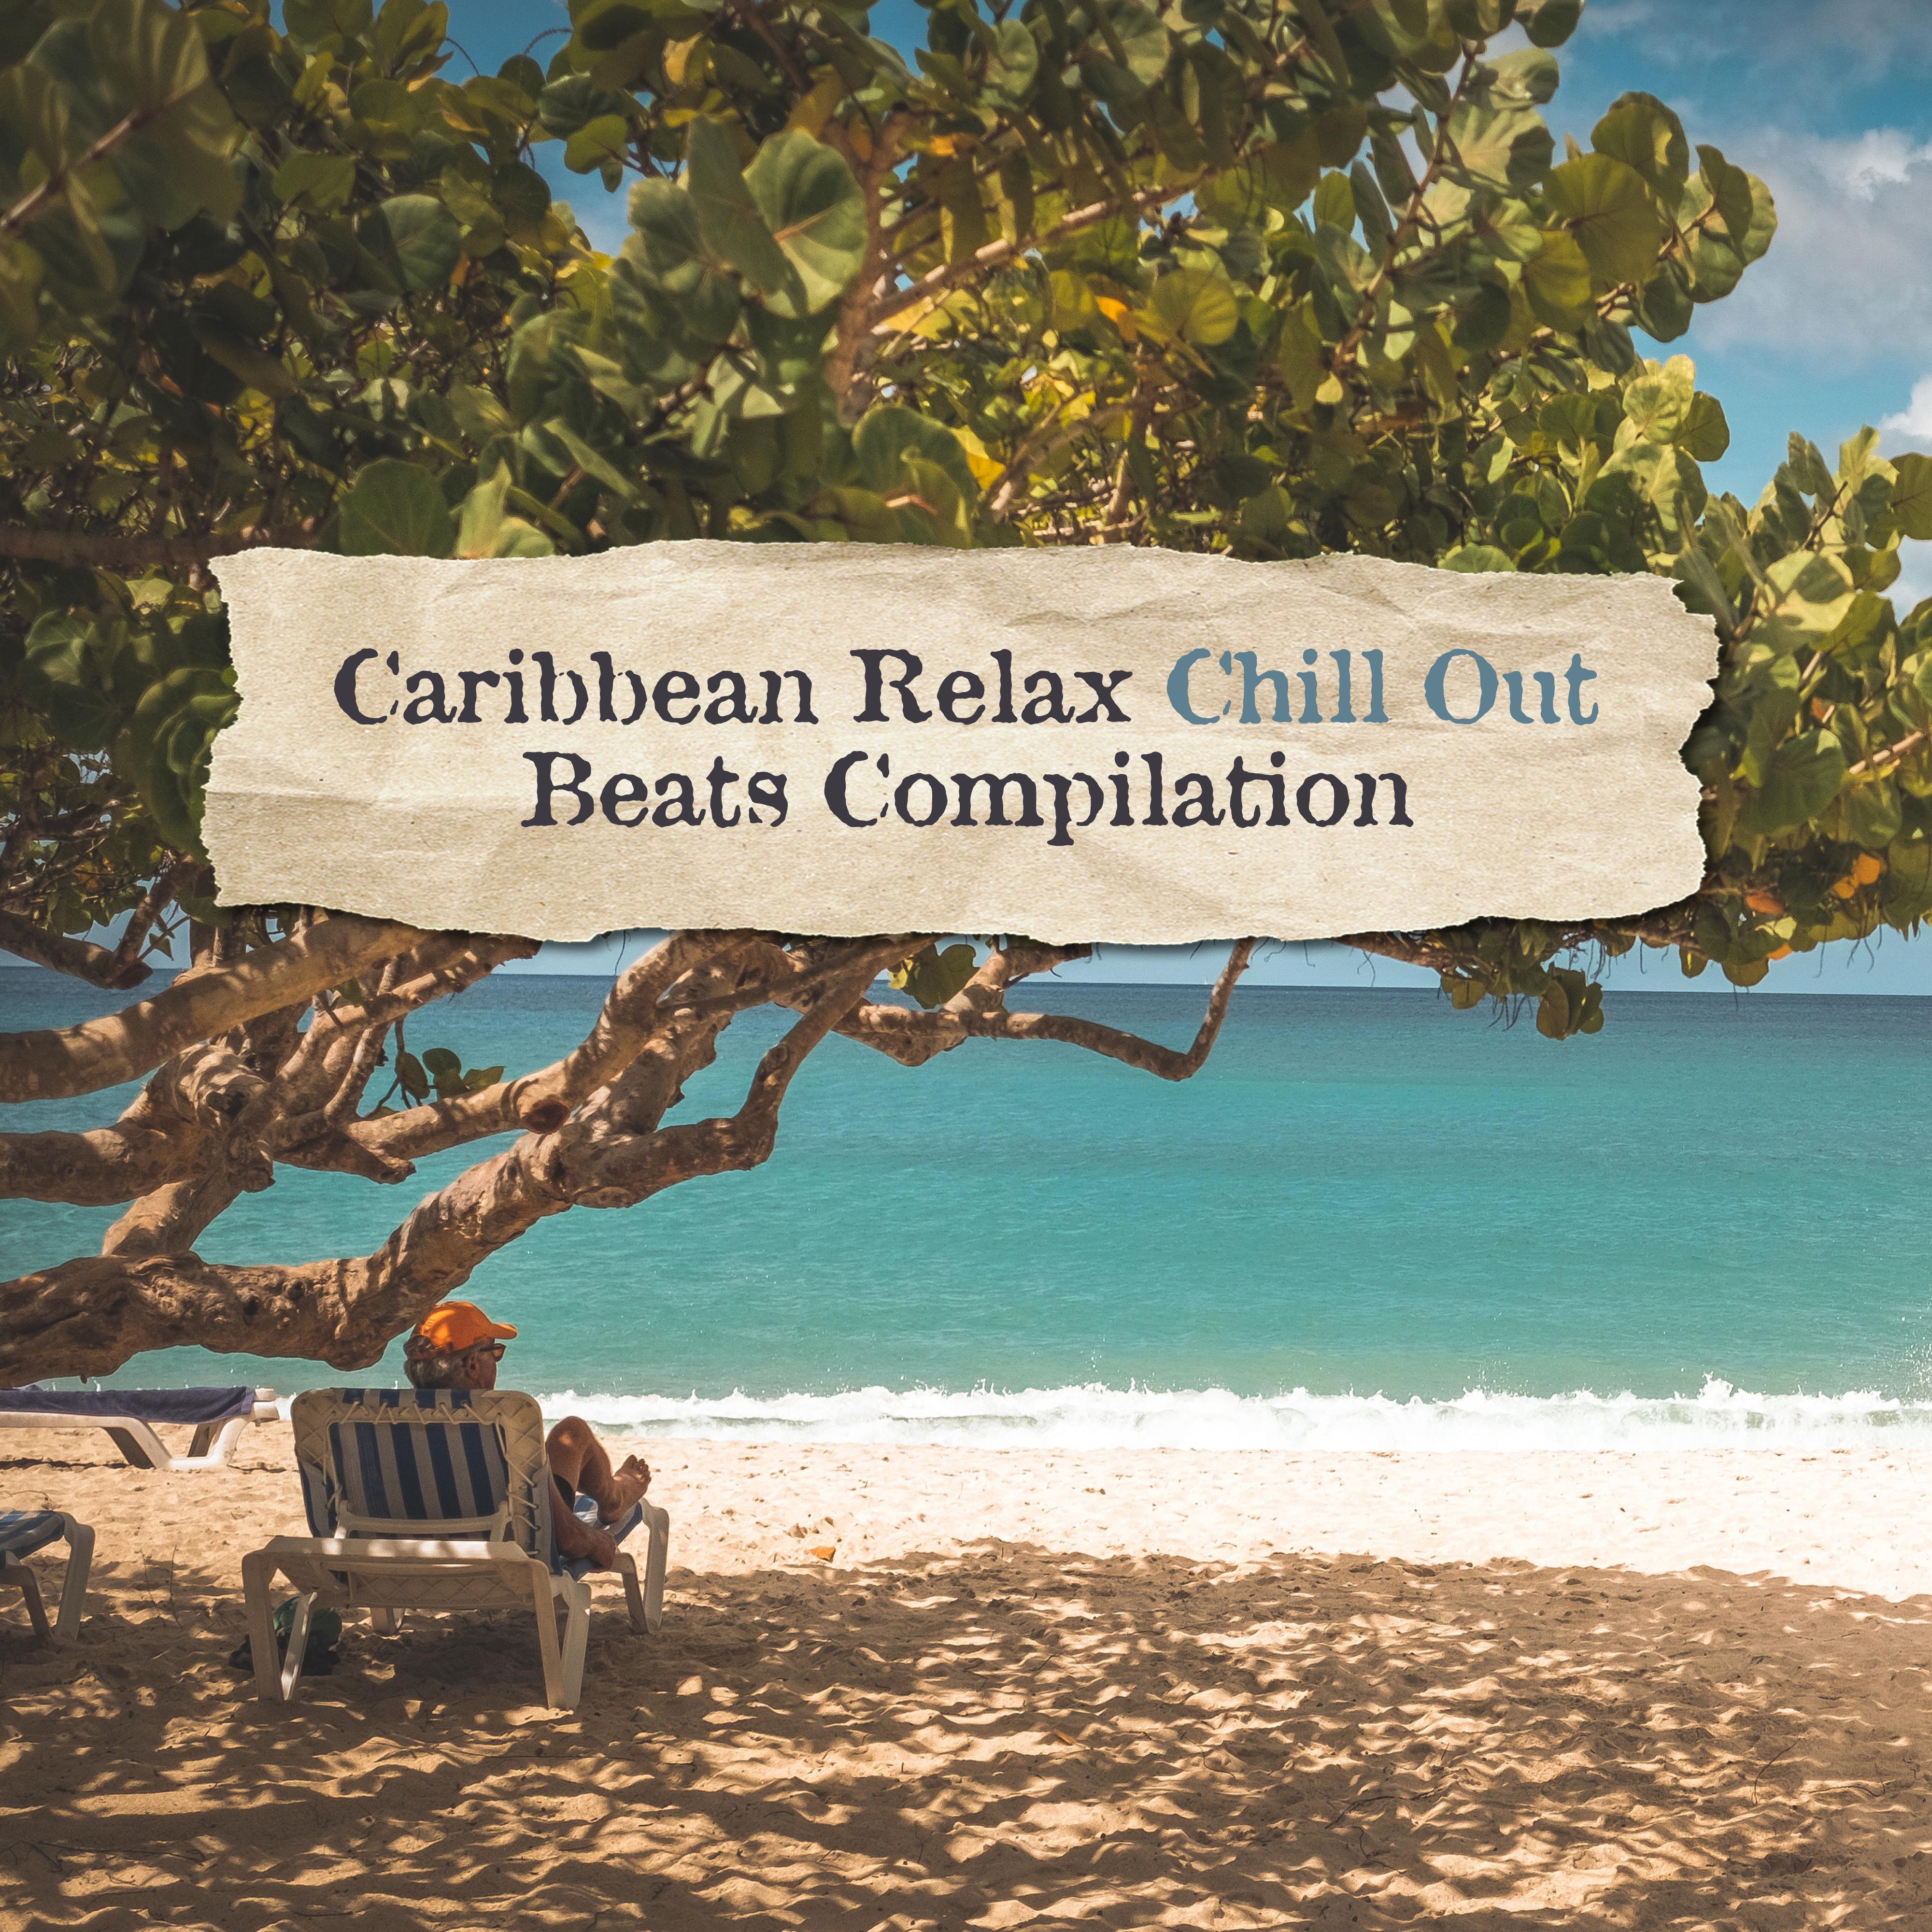 Caribbean Relax Chill Out Beats Compilation